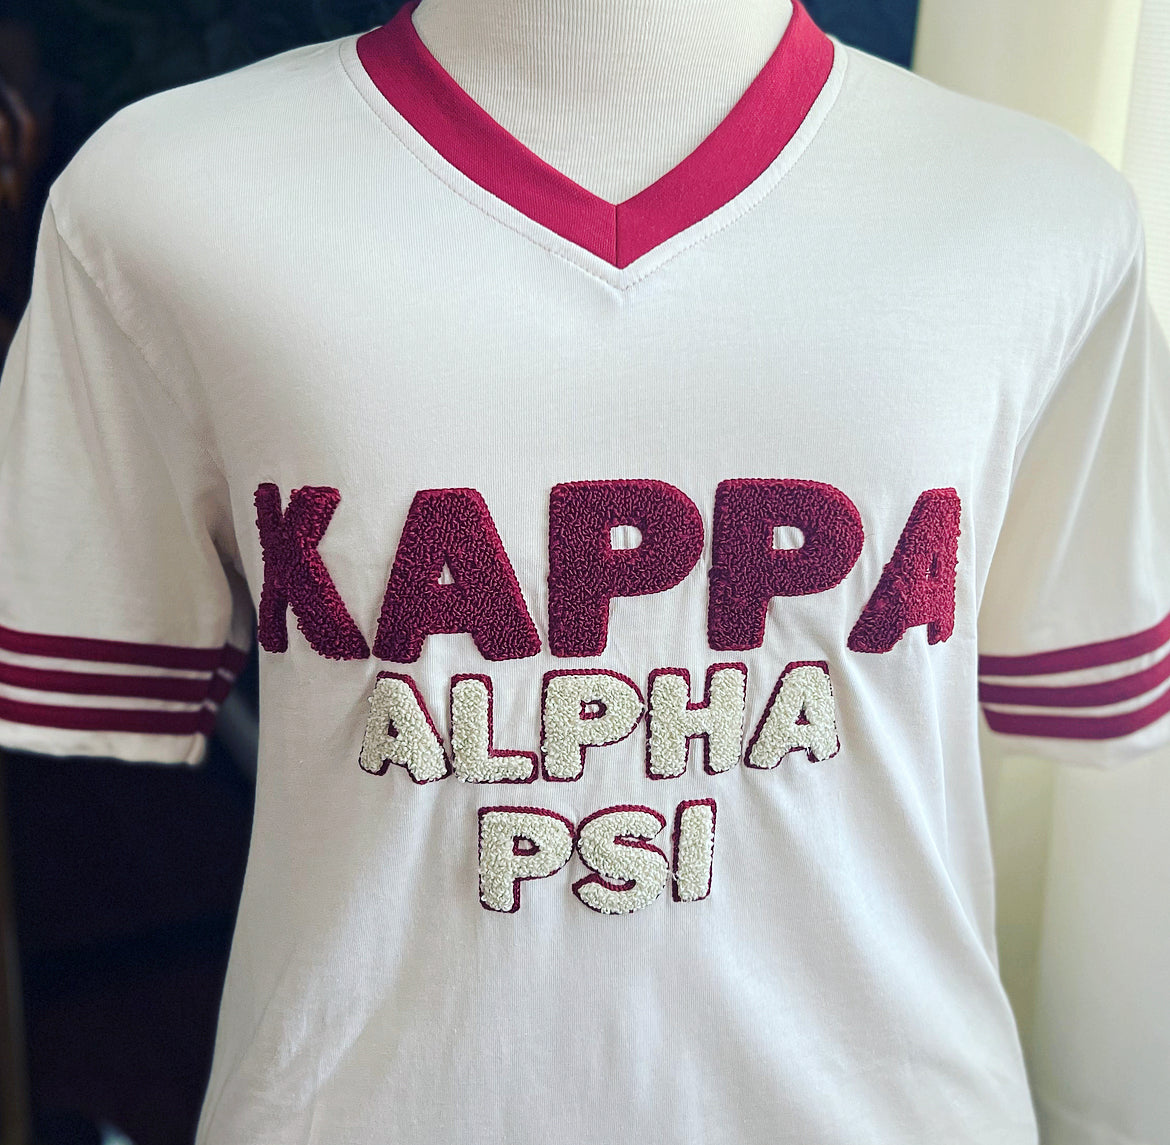 Exclusive Kappa Alpha Psi Double Chenille Lettered T-shirt . This is the perfect short-sleeved shirt to wear while showing off your Kappa Alpha Psi fraternity lettering. A comfortable 100% cotton tee with a twill Greek letters embroidery across the chest give you the perfect fit. This shirt is also a perfect gift for your favorite Kappa Man.    Fast Shipping & Processing: 1-2 days to process US Domestic Shipping: 3-5 business days International Shipping: 7-14 business